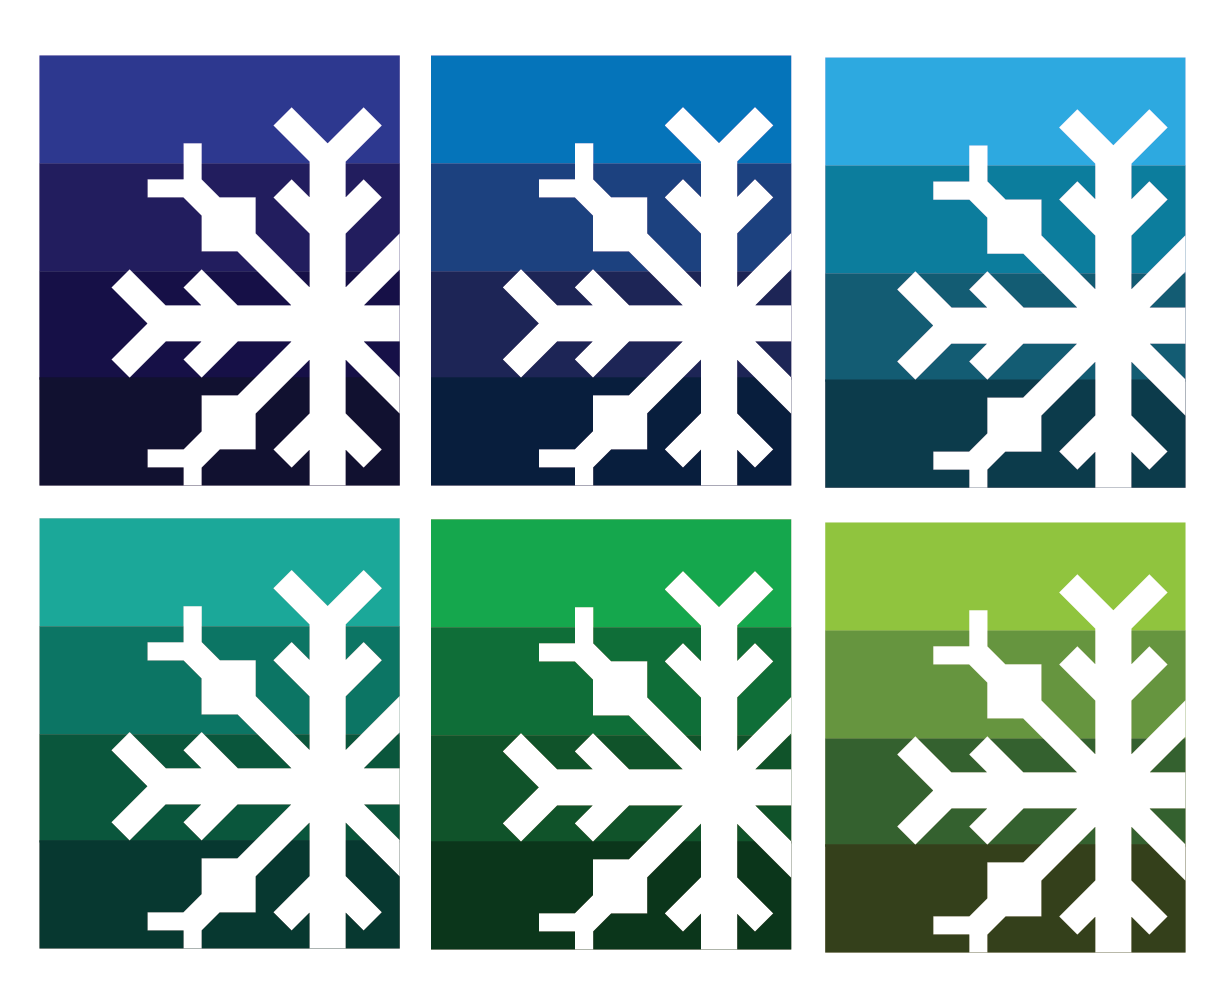 Snowflake Quilt in Gradient of Cool Colors